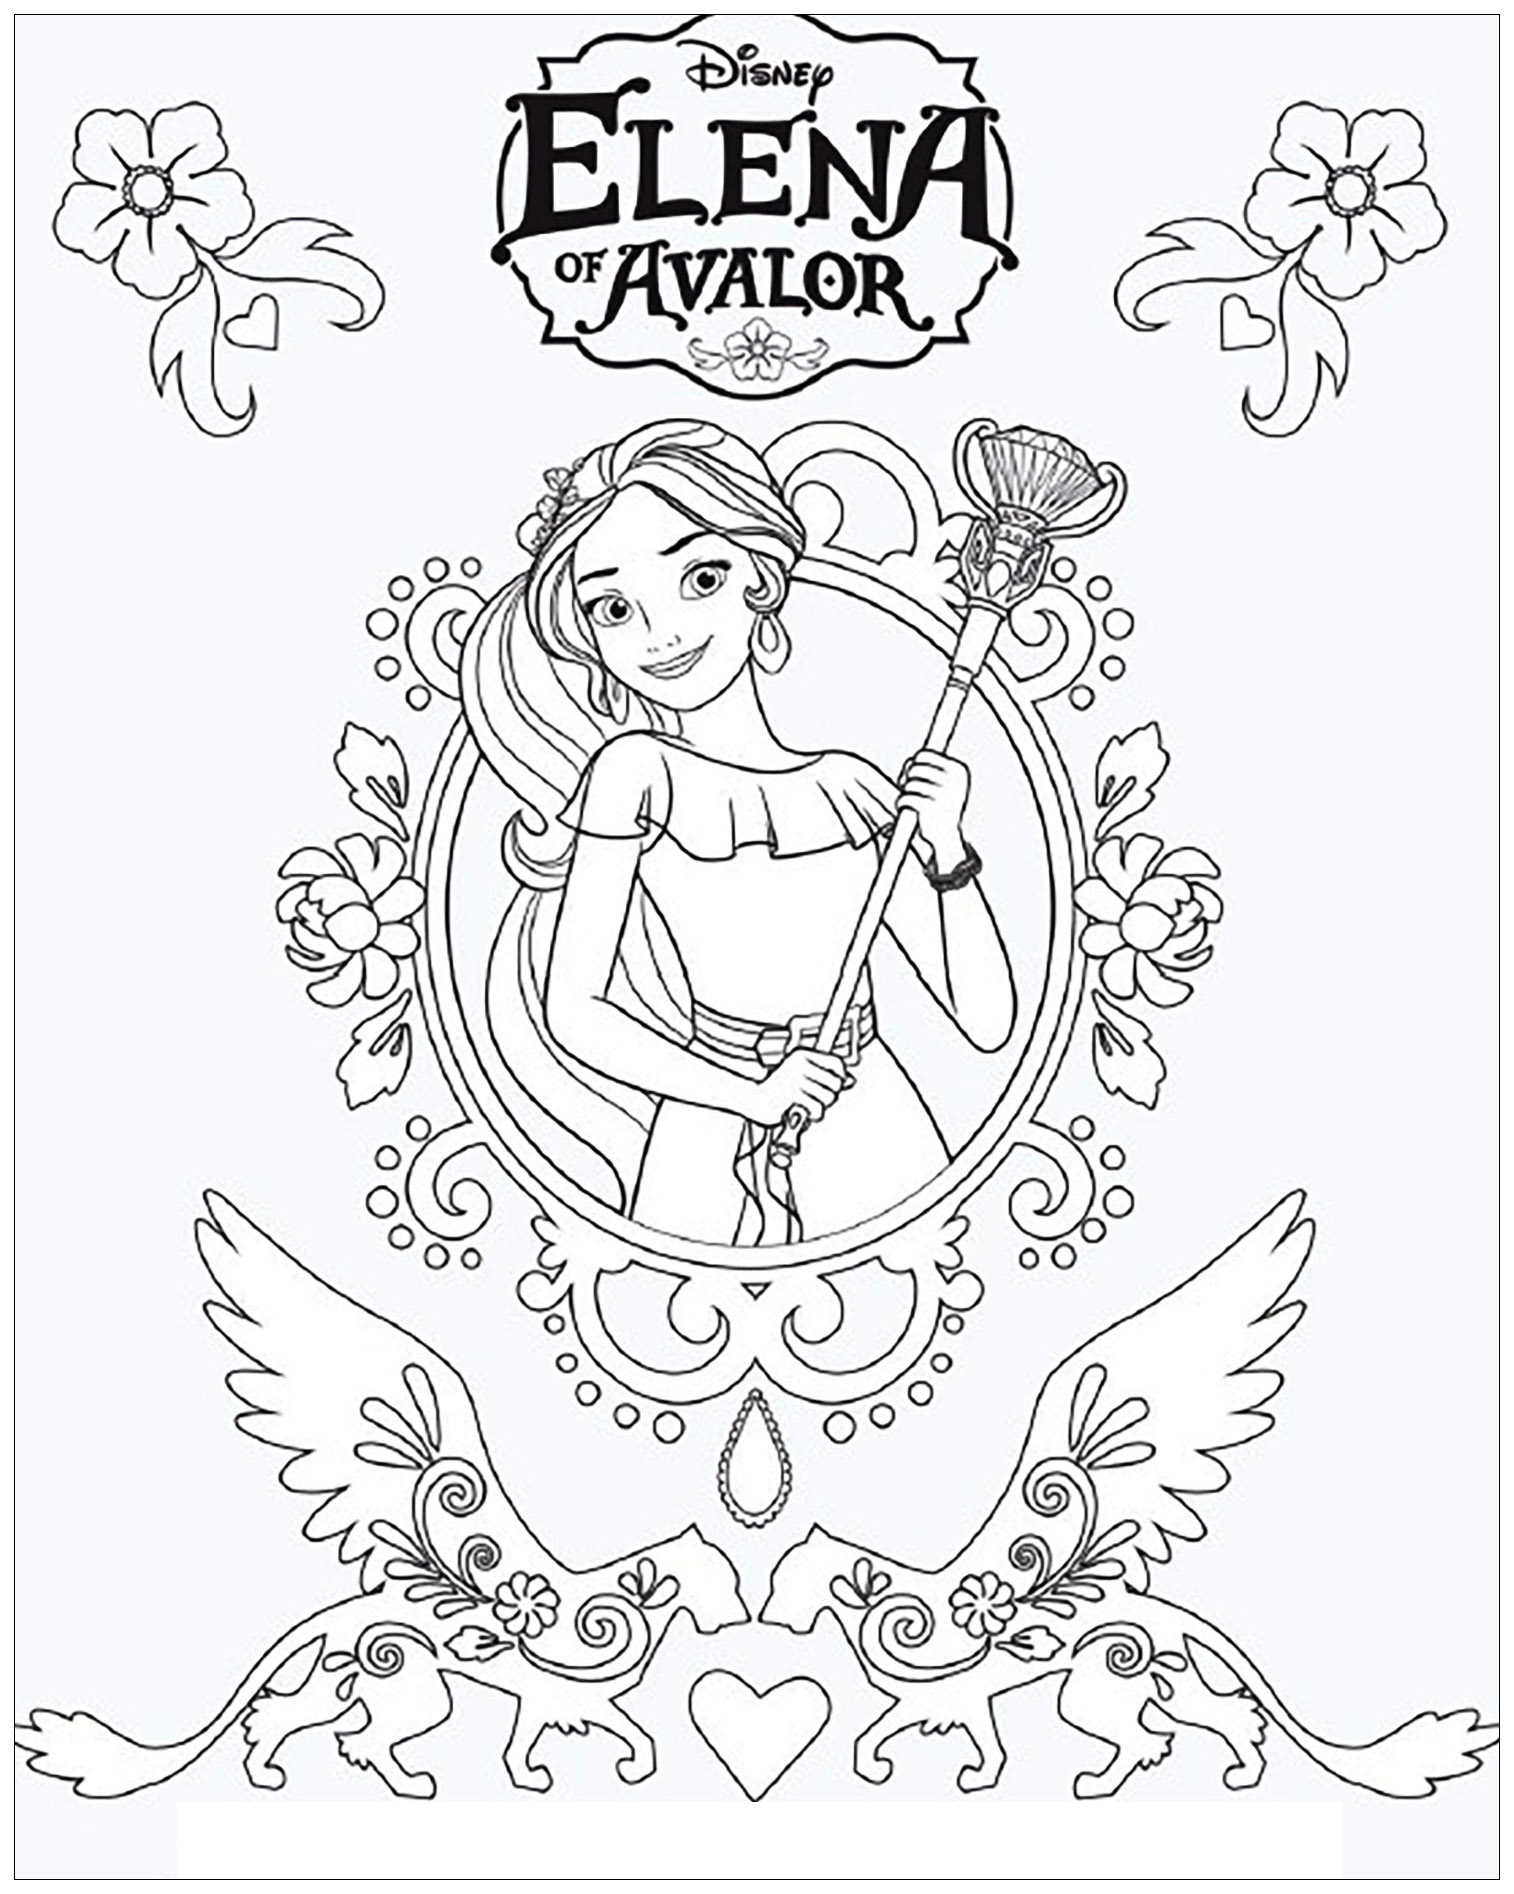 Elena avalor to color for children - Elena Avalor Kids Coloring Pages